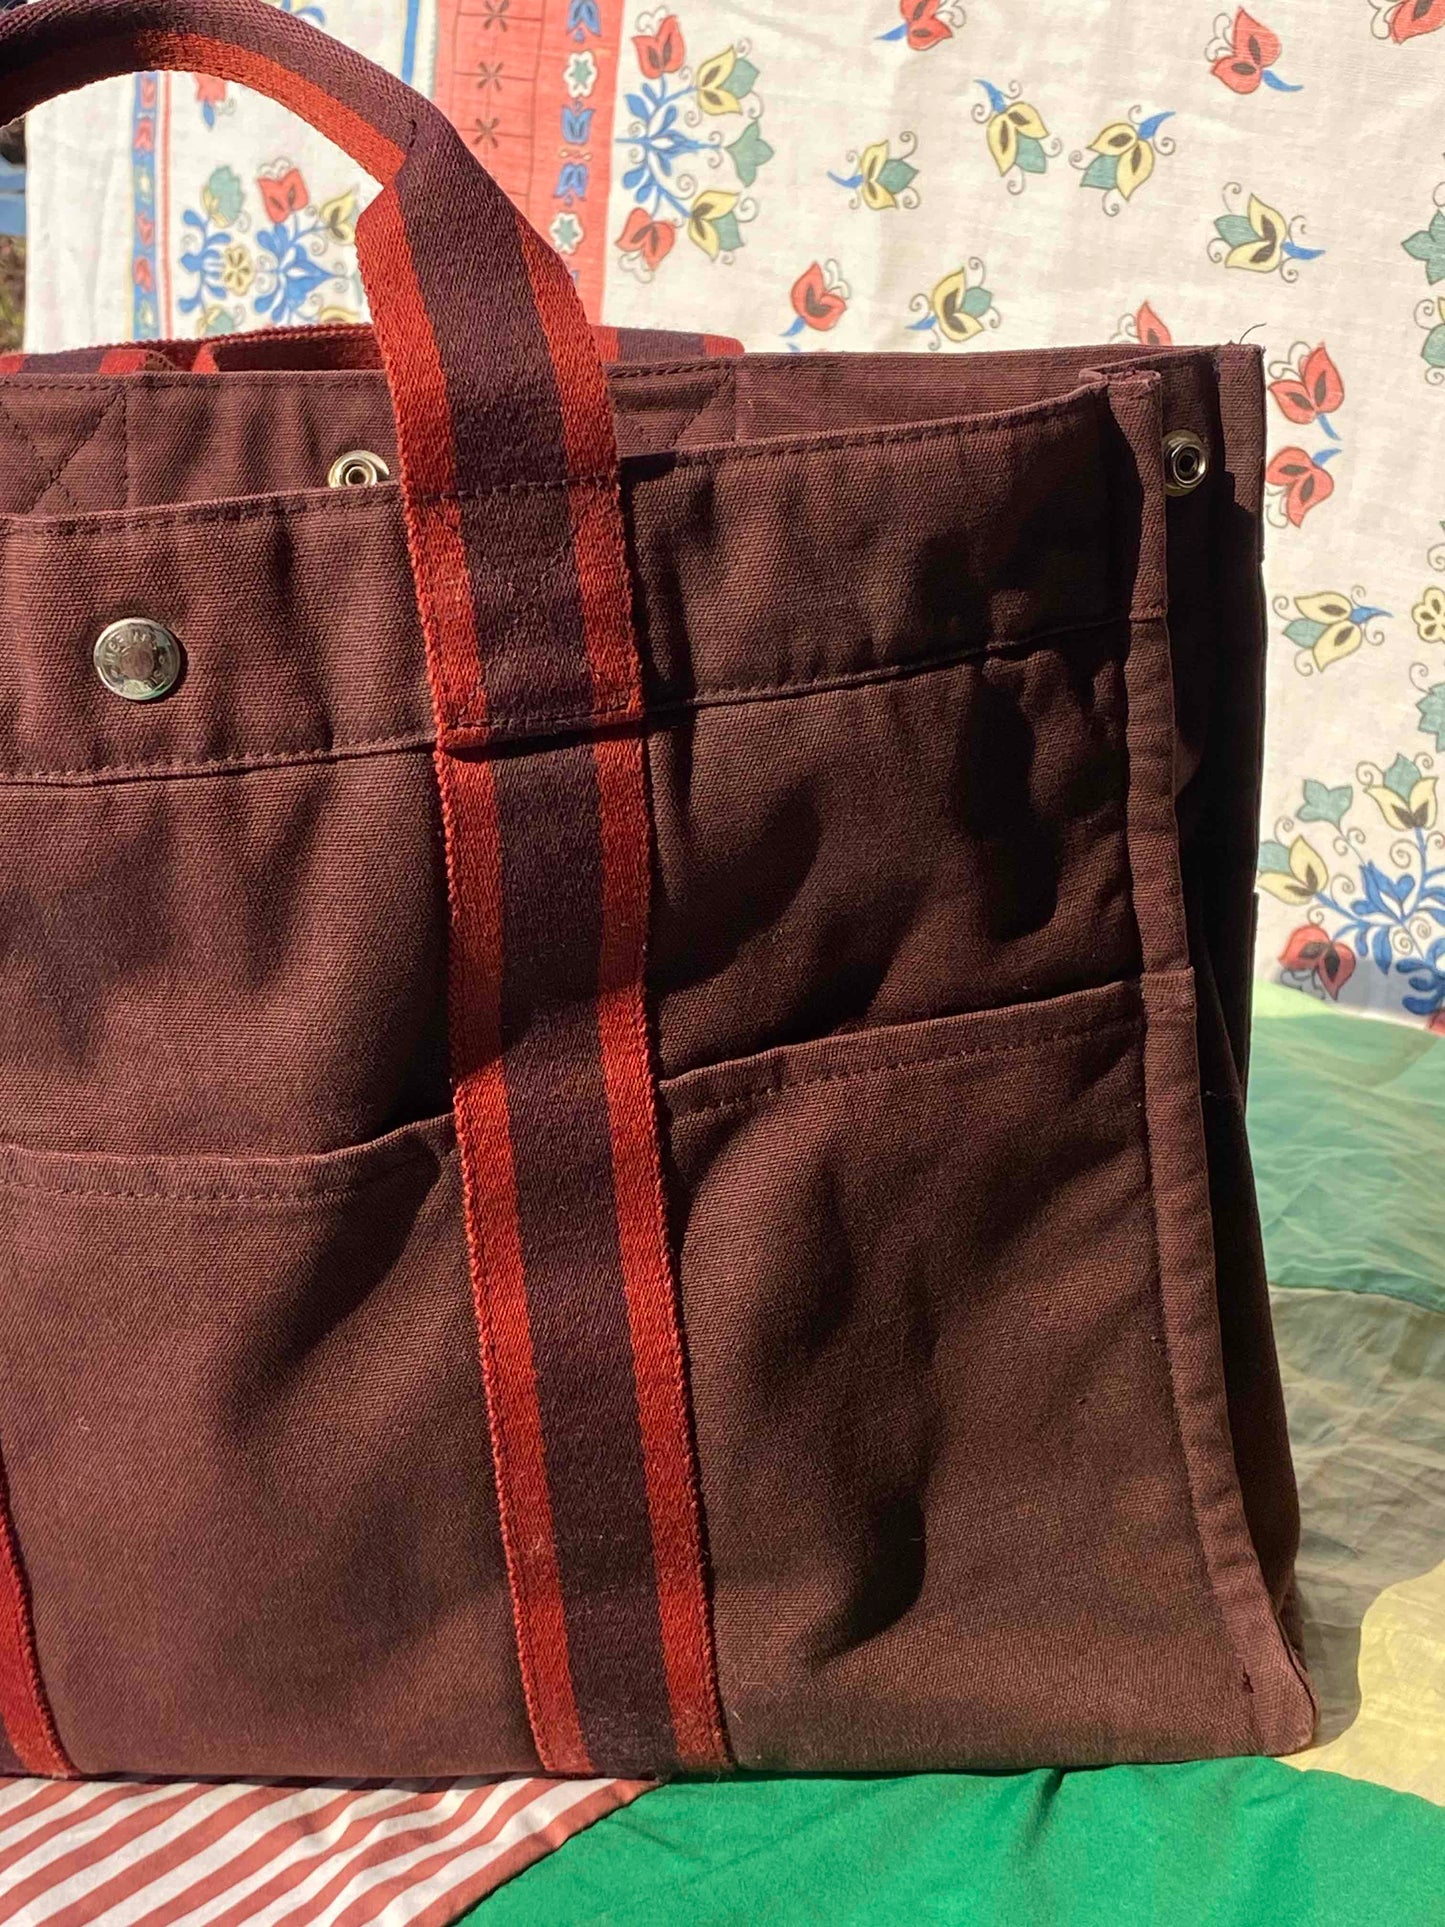 PEARLE closet - Hermes Burgundy and Red Stripe Tote